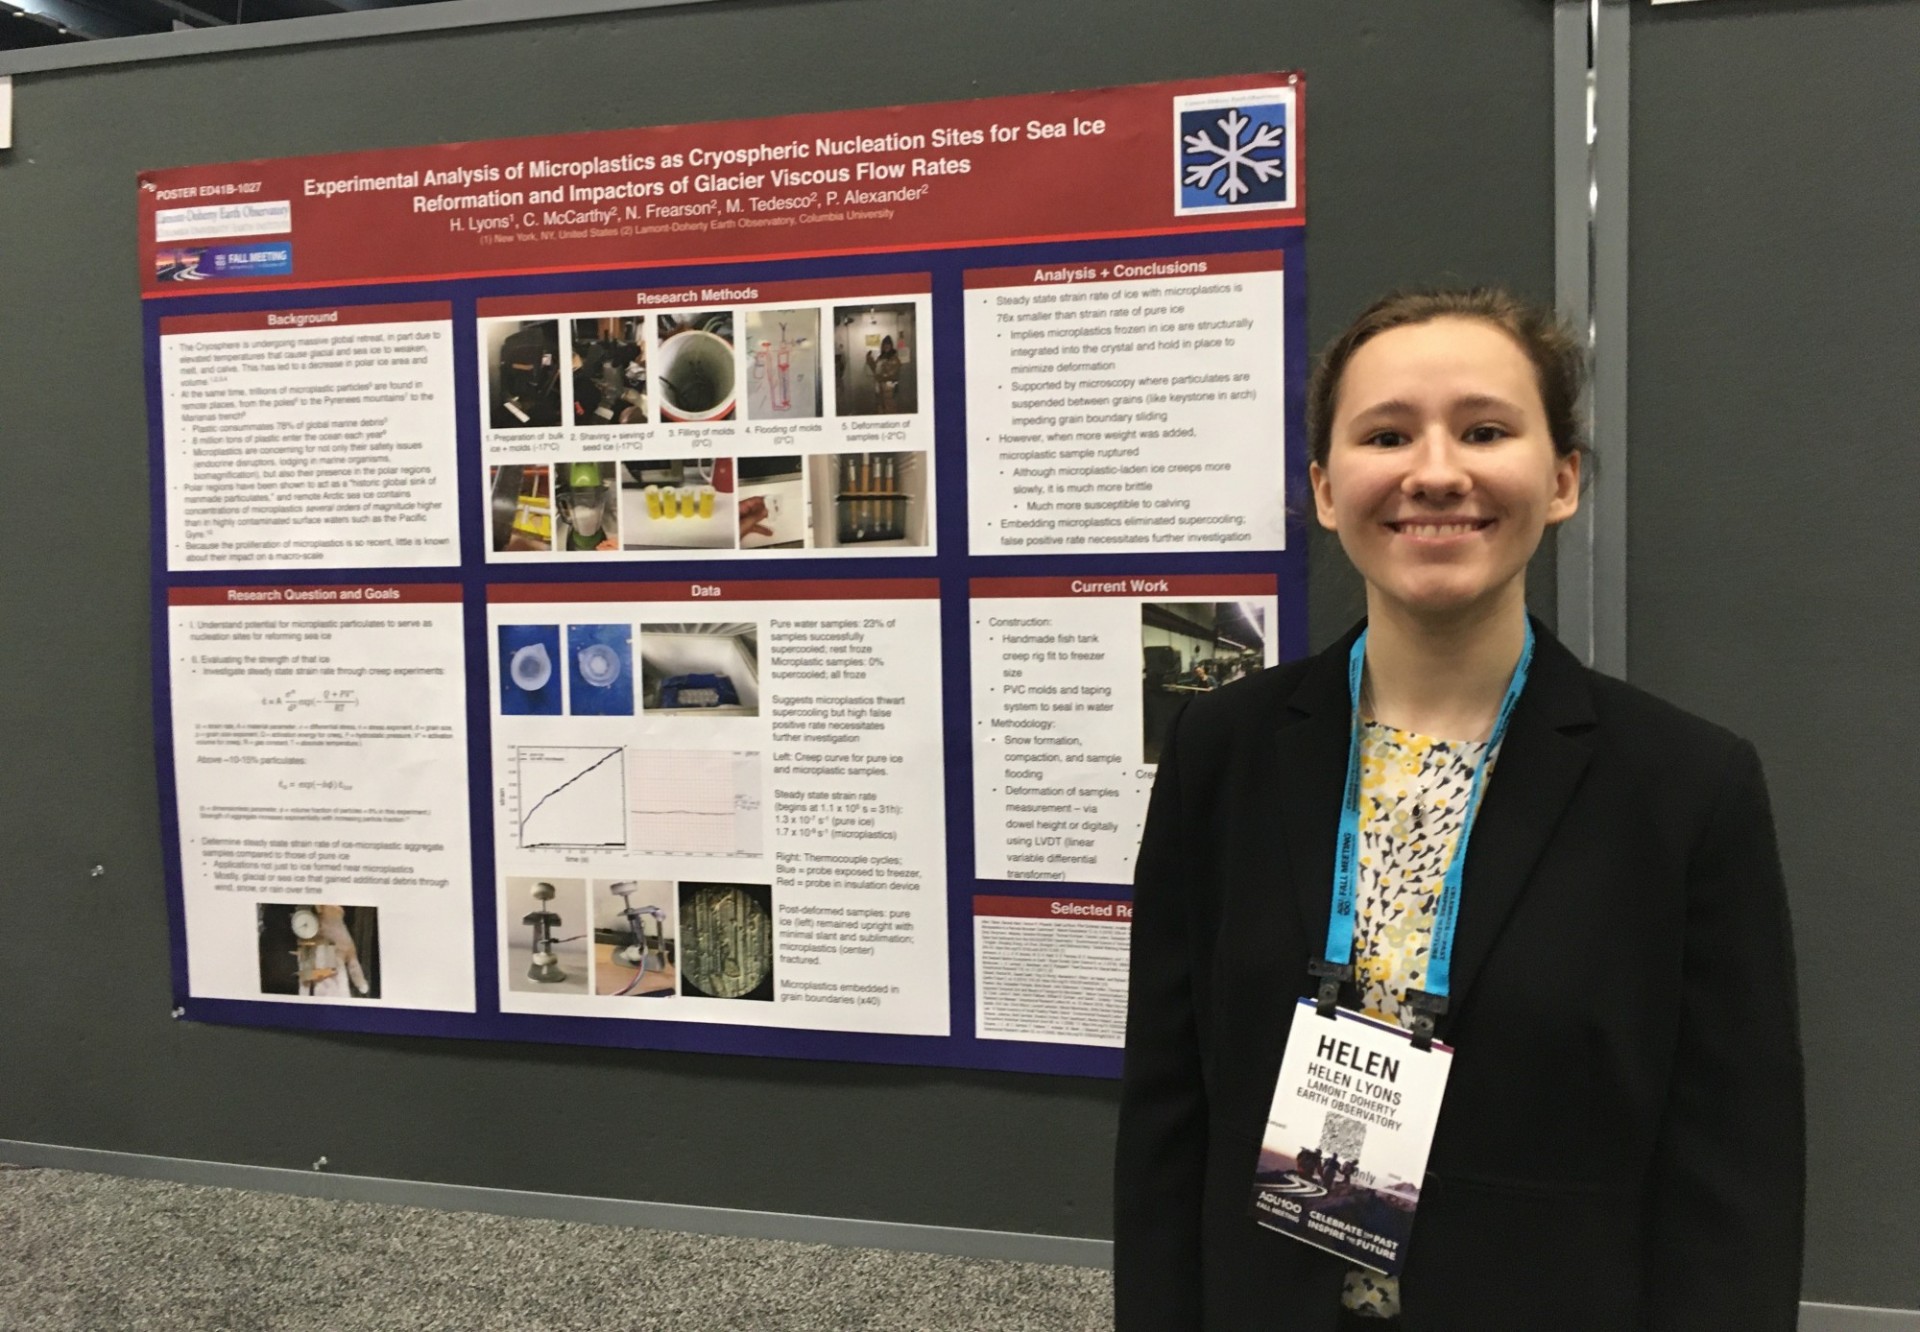 High school intern Helen Lyons shows off her awesome experiments on ice + microplastics at AGU (2019).